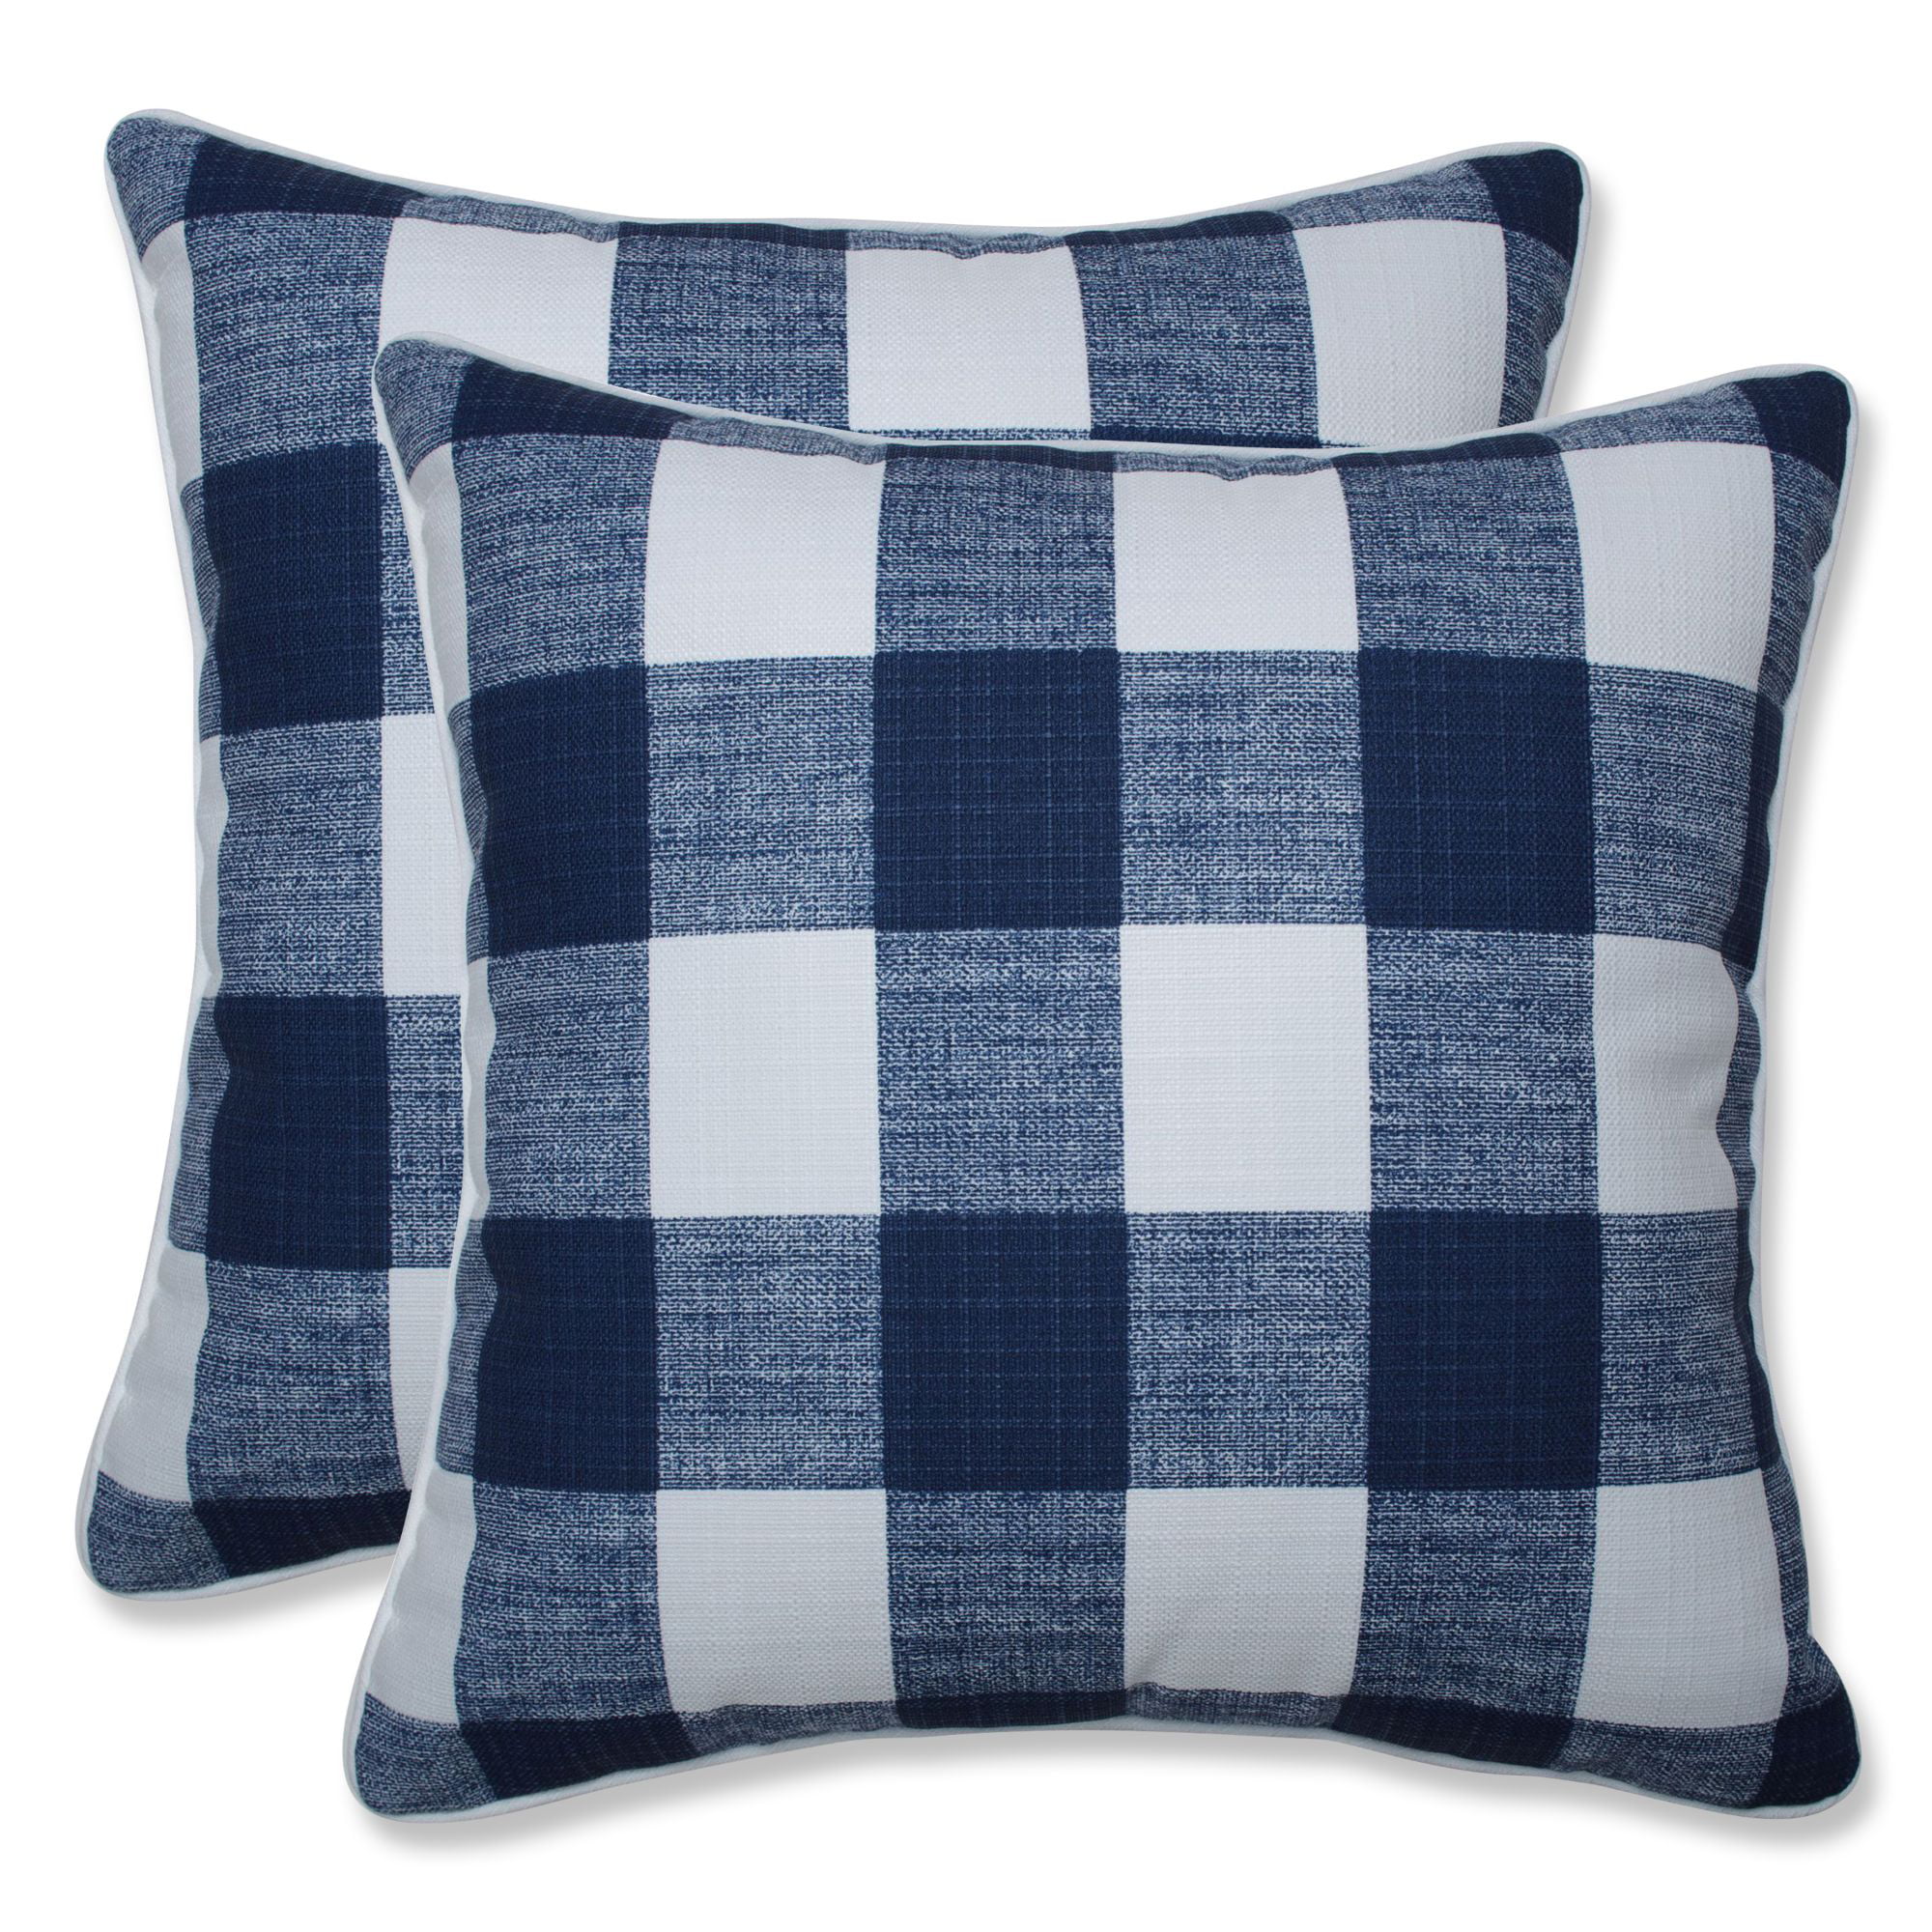 Set of 2 Blue and White Buffalo Checkered UV Resistant Outdoor Patio Square Throw Pillows 18.5